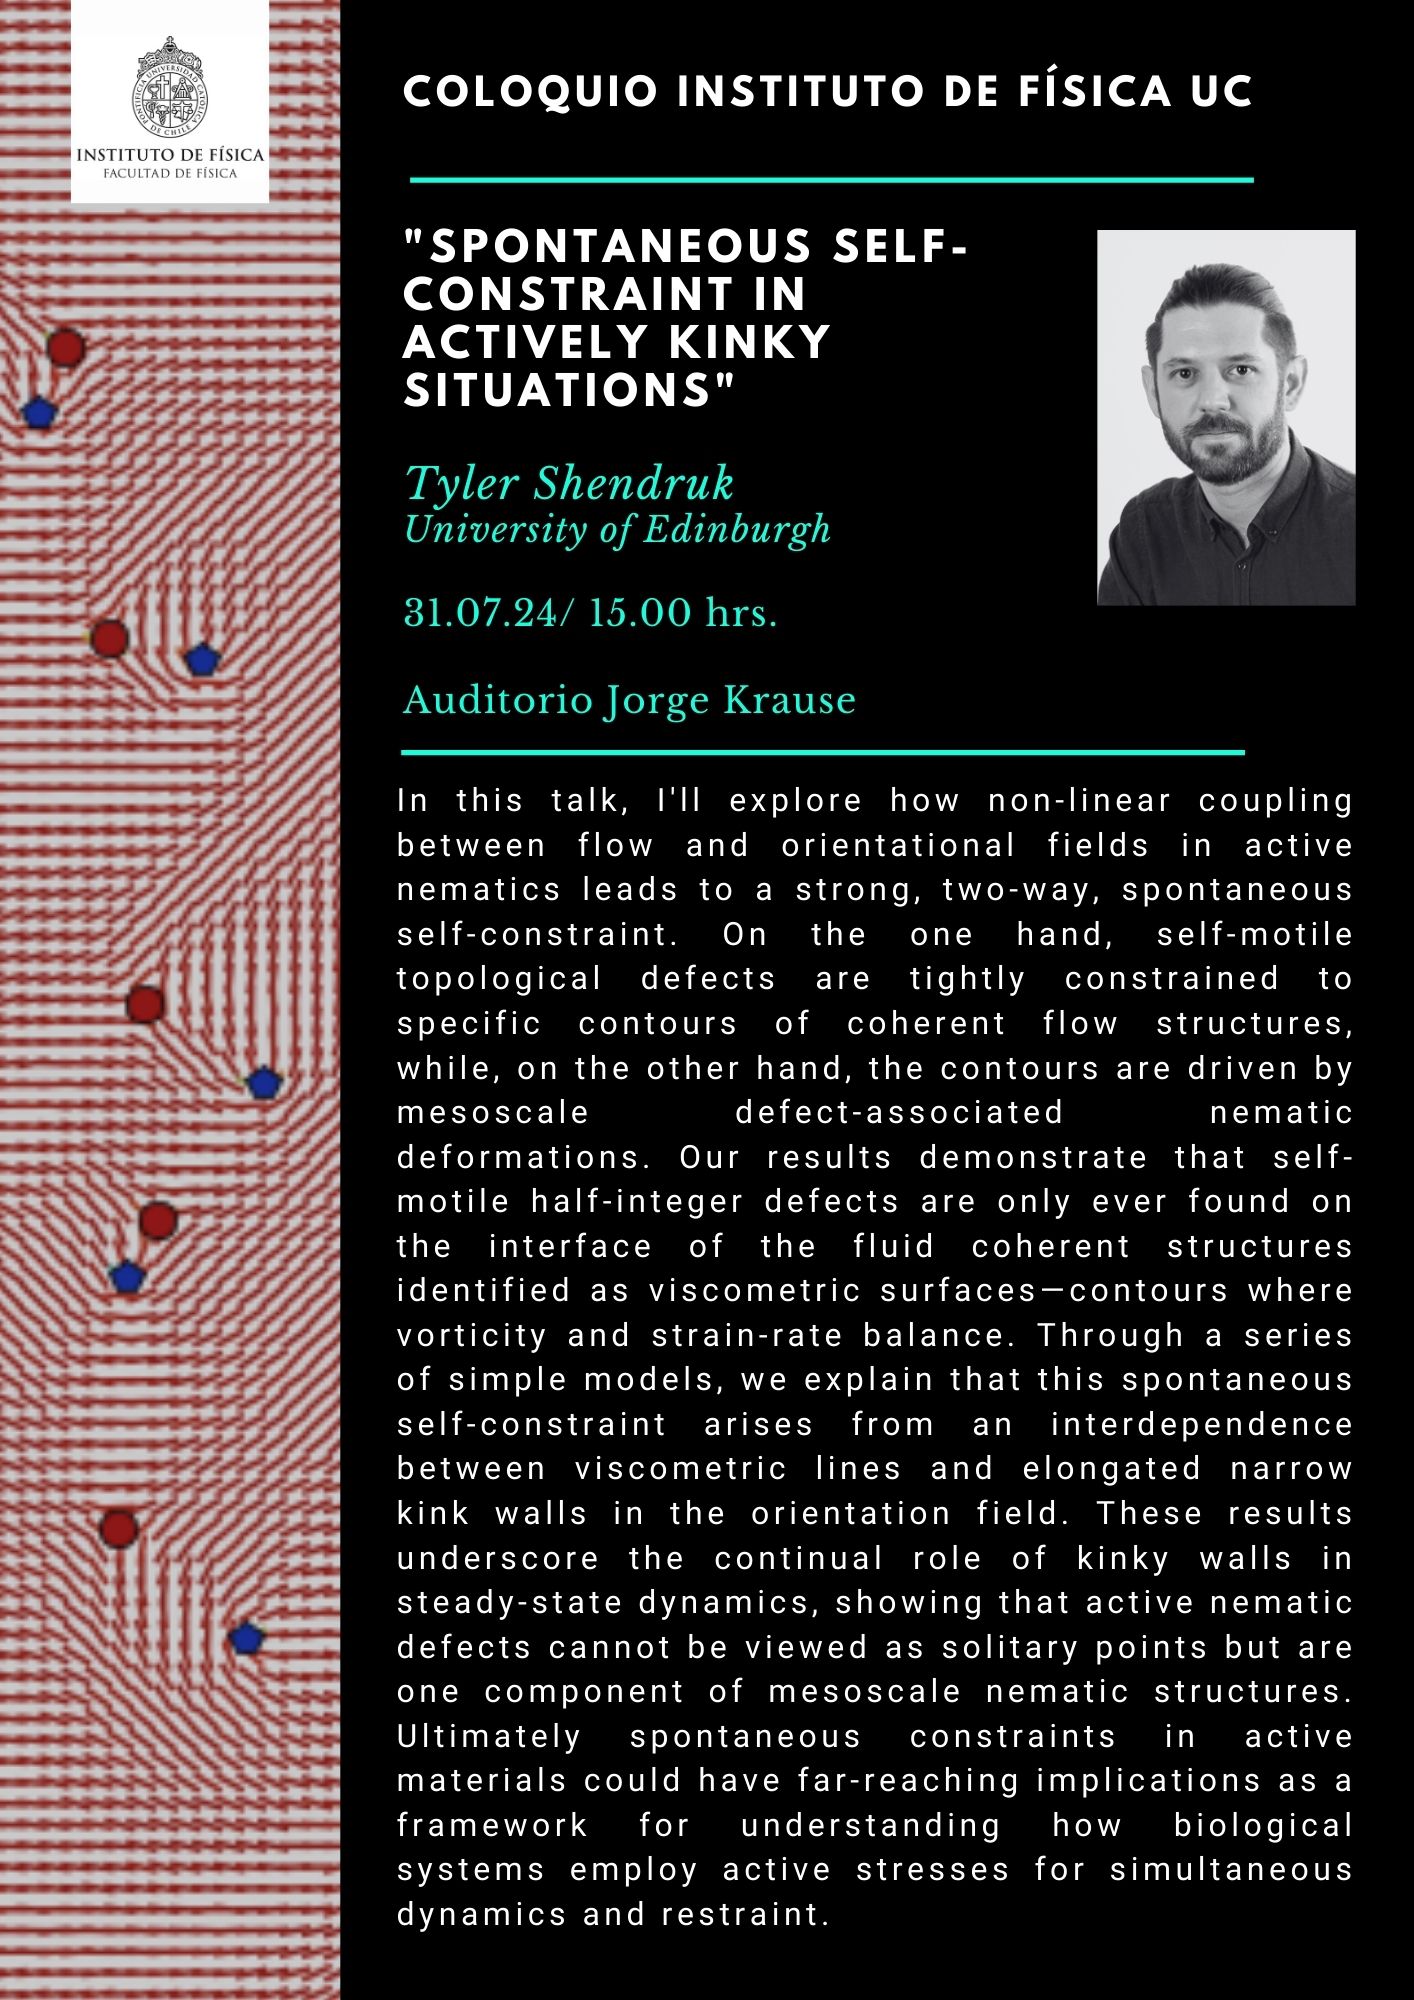 Te invitamos al coloquio &quot;Spontaneous Self-Constraint in Actively Kinky Situations&quot;, por Tyler Shendruk